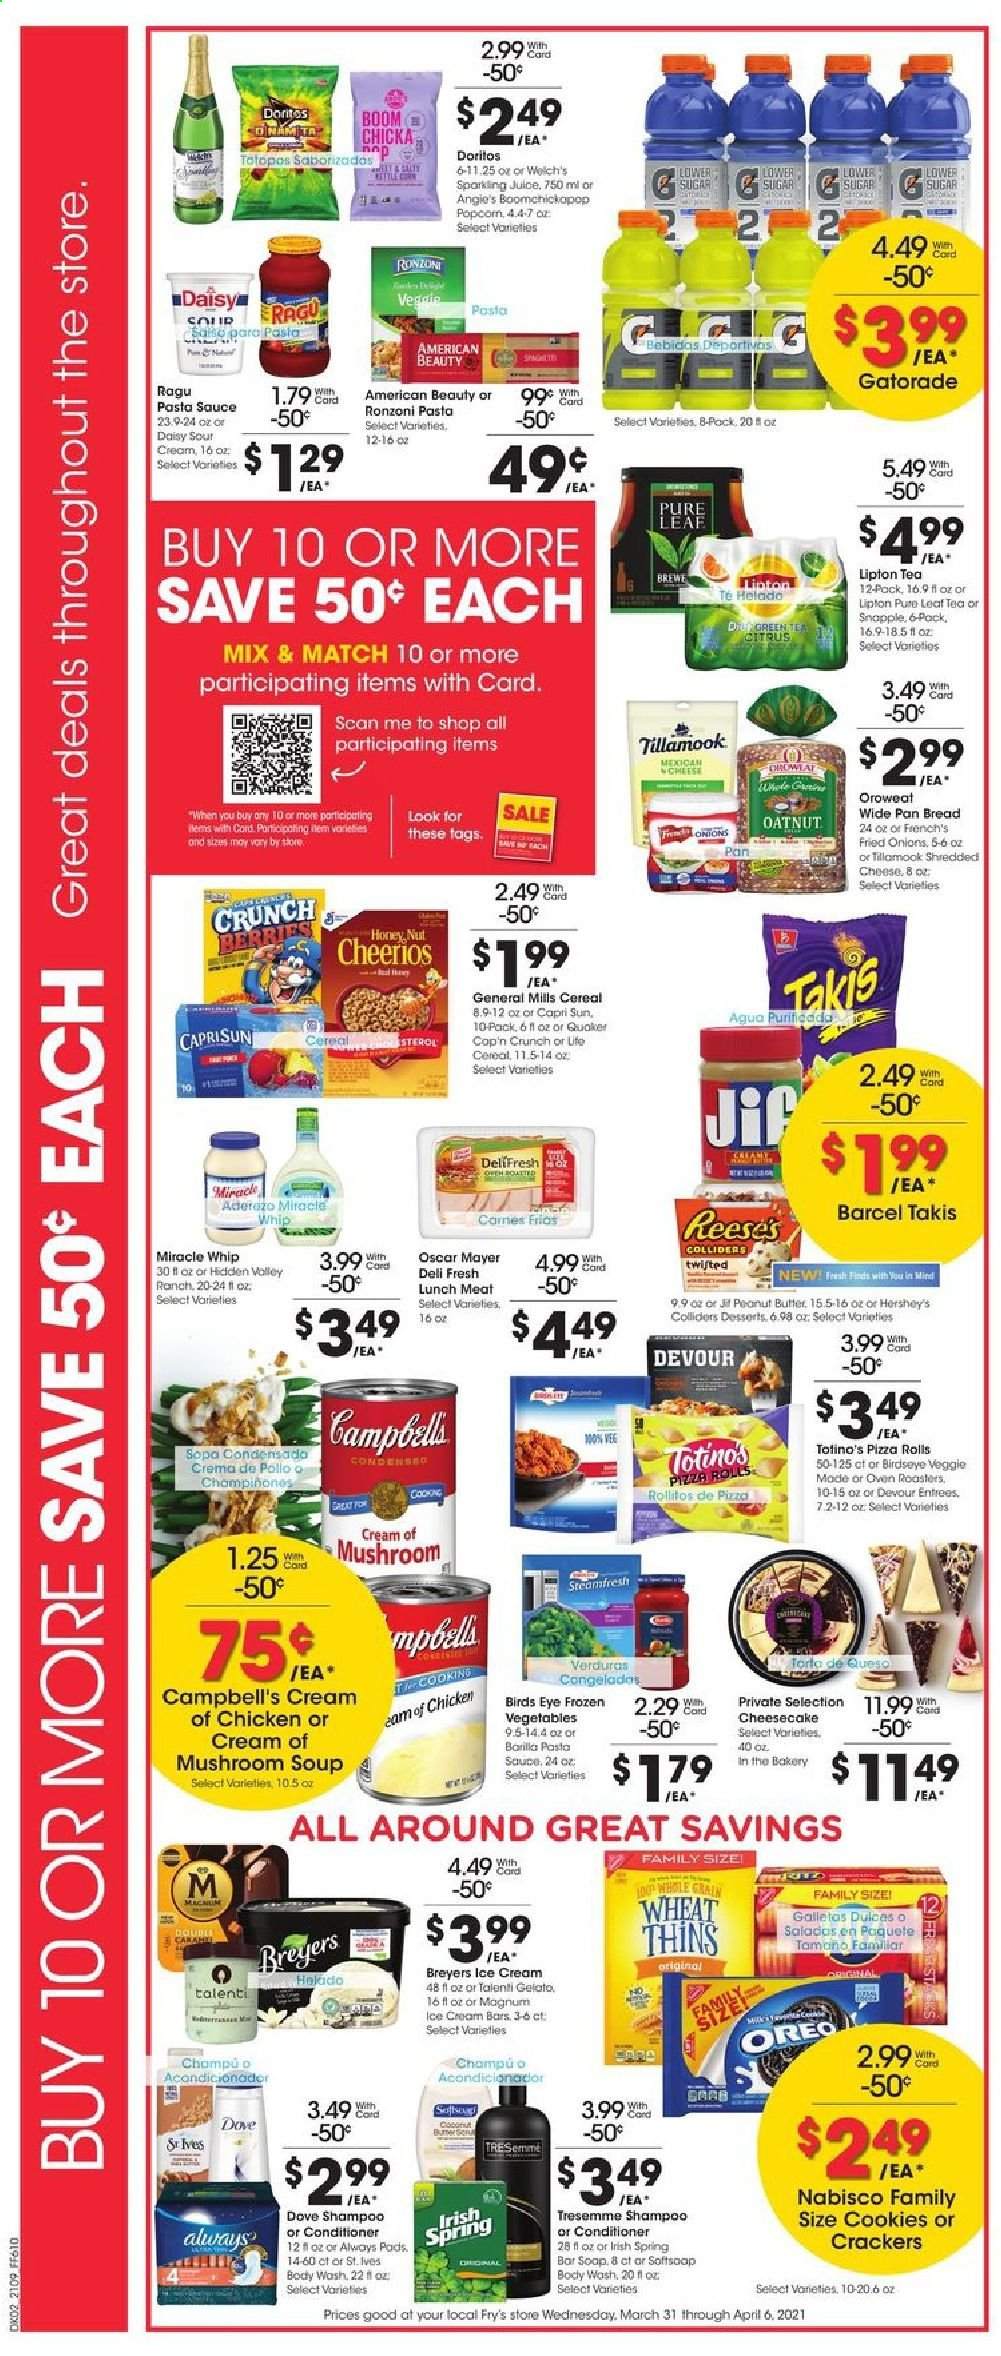 thumbnail - Fry’s Flyer - 03/31/2021 - 04/06/2021 - Sales products - mushrooms, bread, pizza rolls, cheesecake, Campbell's, mushroom soup, pizza, soup, Bird's Eye, Barilla, Oscar Mayer, lunch meat, shredded cheese, Oreo, butter, sour cream, Miracle Whip, Magnum, ice cream, ice cream bars, Reese's, Hershey's, Talenti Gelato, gelato, Devour, cookies, crackers, Doritos, Thins, sugar, cereals, Cheerios, pasta sauce, ragu, Jif, Capri Sun, Lipton, Snapple, Gatorade, tea, Pure Leaf, Dove, body wash, shampoo, soap bar, soap, conditioner, TRESemmé, pan, oven, onion. Page 3.